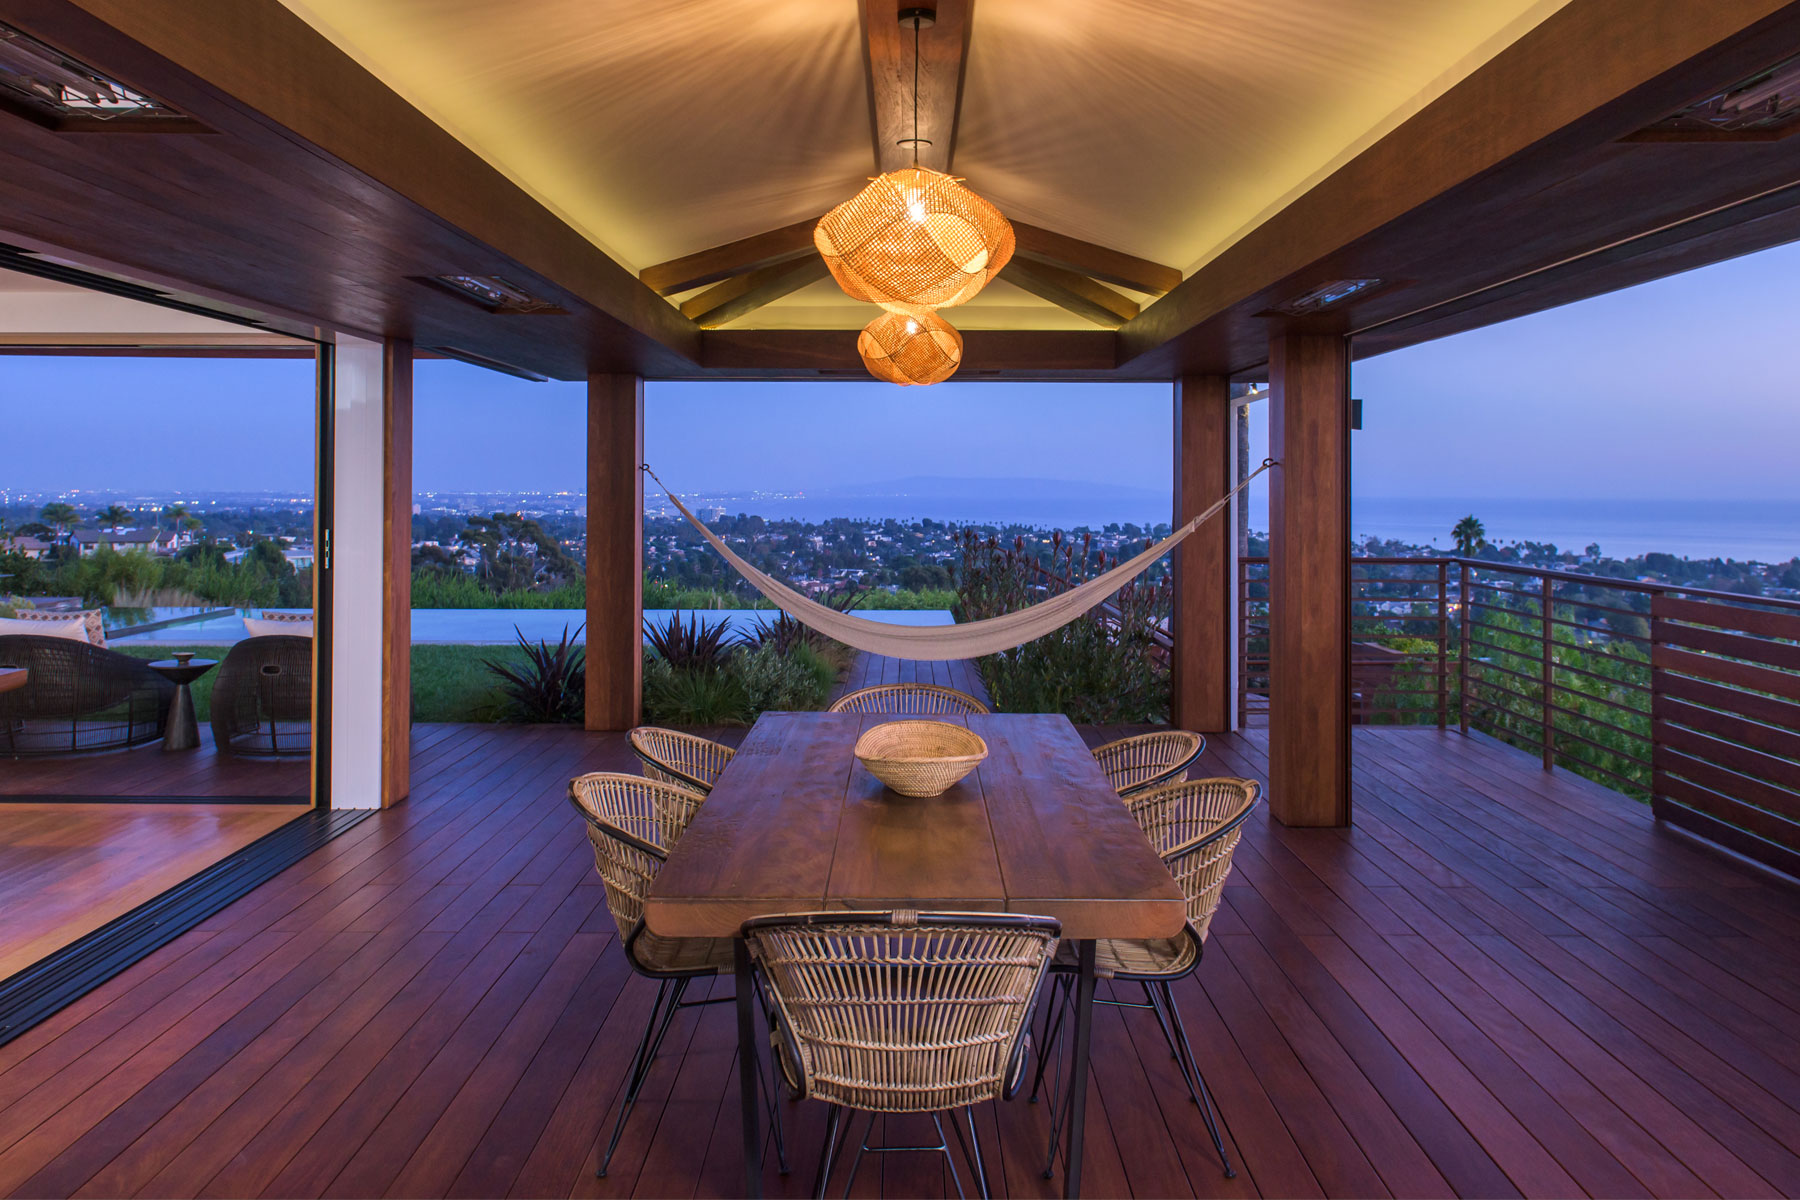 At night view of tranquil and elegant outdoor dining room wood deck and covered